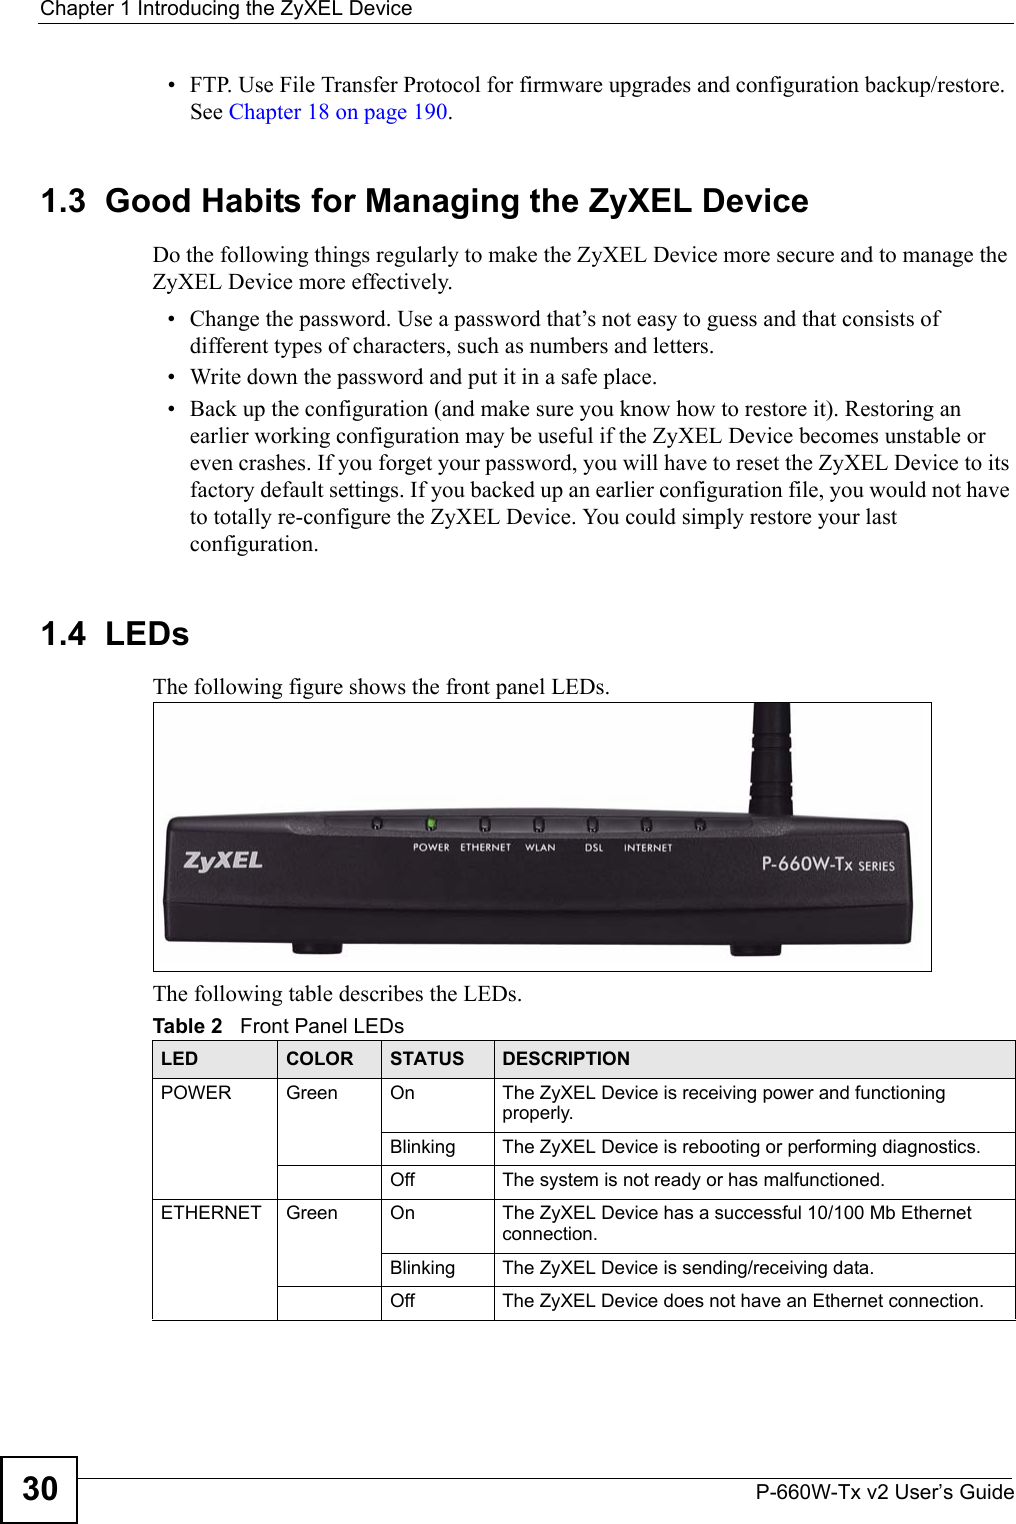 Chapter 1 Introducing the ZyXEL DeviceP-660W-Tx v2 User’s Guide30• FTP. Use File Transfer Protocol for firmware upgrades and configuration backup/restore. See Chapter 18 on page 190. 1.3  Good Habits for Managing the ZyXEL DeviceDo the following things regularly to make the ZyXEL Device more secure and to manage the ZyXEL Device more effectively.• Change the password. Use a password that’s not easy to guess and that consists of different types of characters, such as numbers and letters.• Write down the password and put it in a safe place.• Back up the configuration (and make sure you know how to restore it). Restoring an earlier working configuration may be useful if the ZyXEL Device becomes unstable or even crashes. If you forget your password, you will have to reset the ZyXEL Device to its factory default settings. If you backed up an earlier configuration file, you would not have to totally re-configure the ZyXEL Device. You could simply restore your last configuration.1.4  LEDsThe following figure shows the front panel LEDs.The following table describes the LEDs.   Table 2   Front Panel LEDsLED COLOR STATUS DESCRIPTIONPOWER Green On The ZyXEL Device is receiving power and functioning properly. Blinking  The ZyXEL Device is rebooting or performing diagnostics.Off The system is not ready or has malfunctioned.ETHERNET  Green On The ZyXEL Device has a successful 10/100 Mb Ethernet connection. Blinking  The ZyXEL Device is sending/receiving data.Off The ZyXEL Device does not have an Ethernet connection.